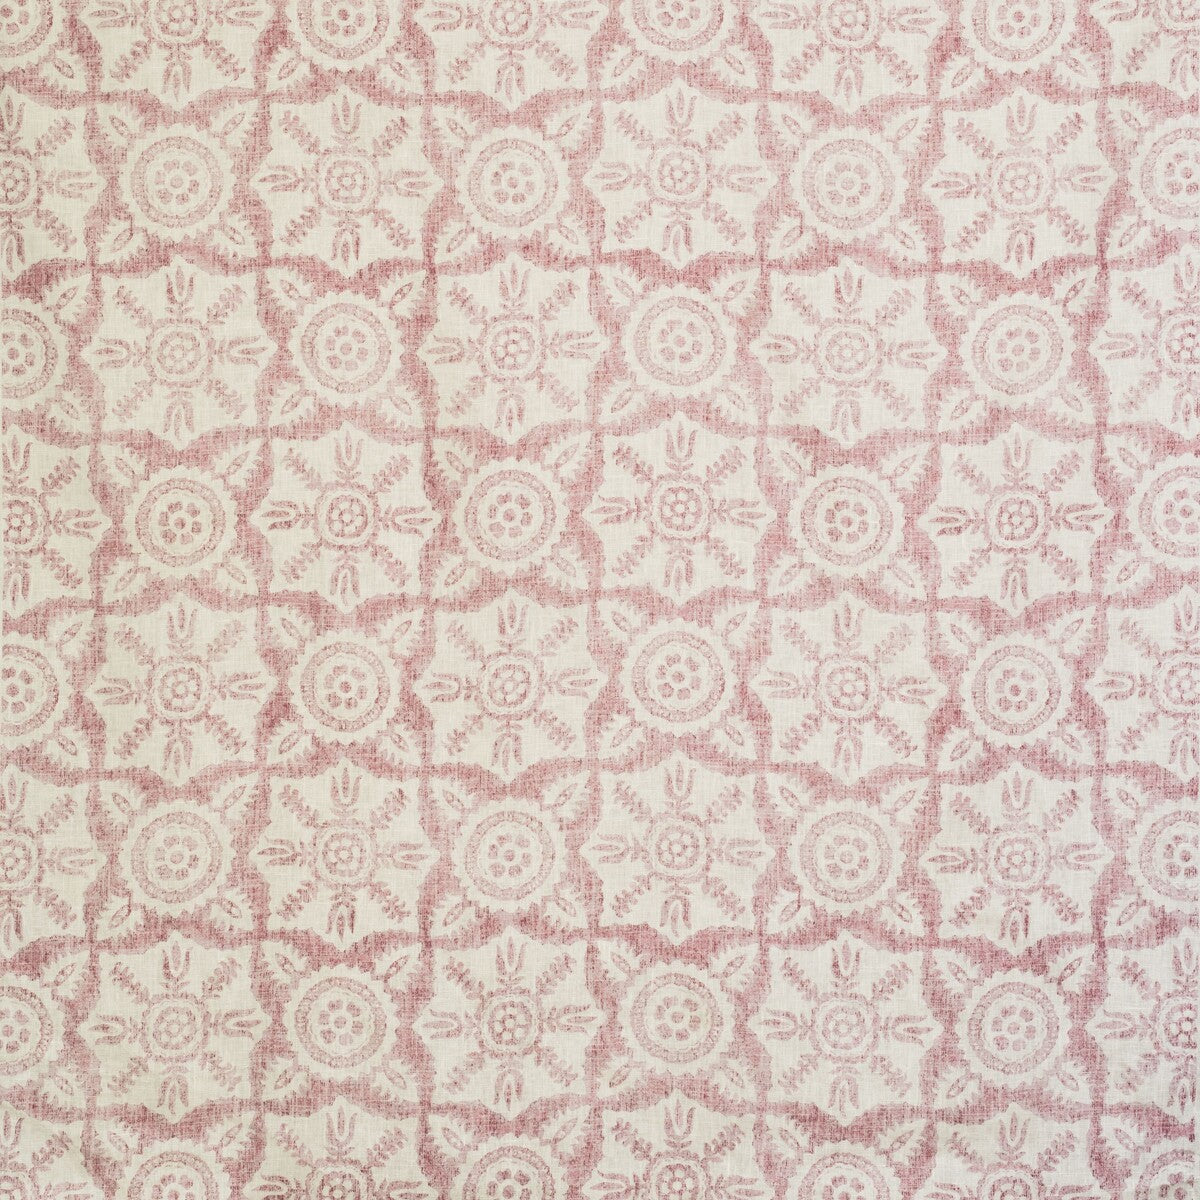 Rossmore II fabric in pink color - pattern BFC-3647.717.0 - by Lee Jofa in the Blithfield collection